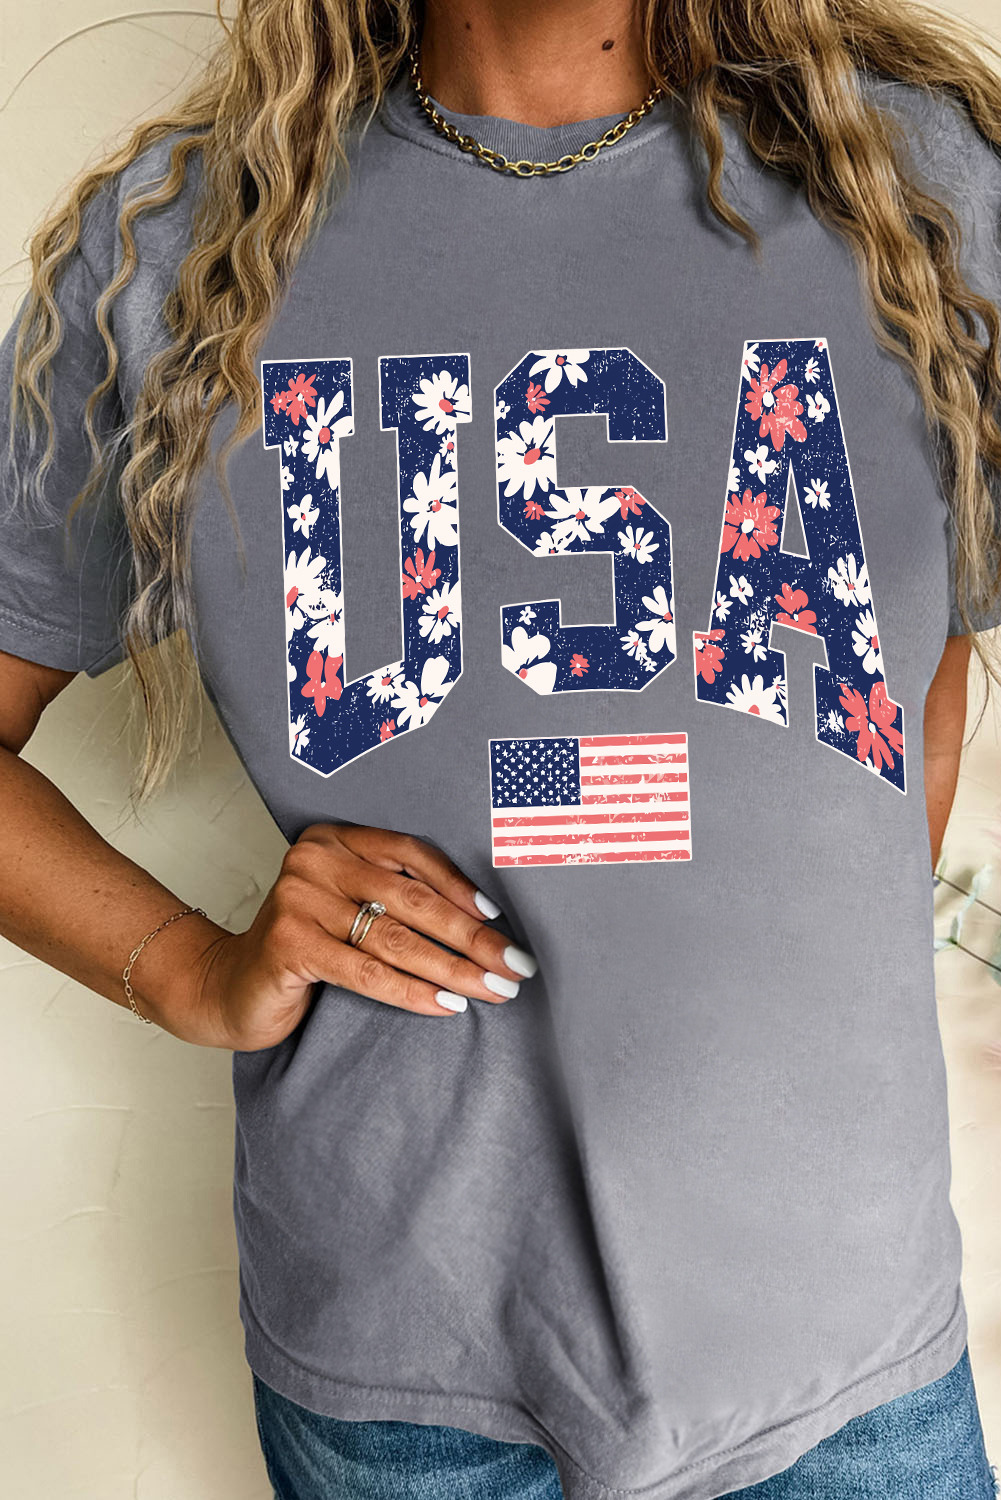 Shewin Wholesale Chic Women Gray Floral USA FLAG Graphic Roll Up Sleeve Tee